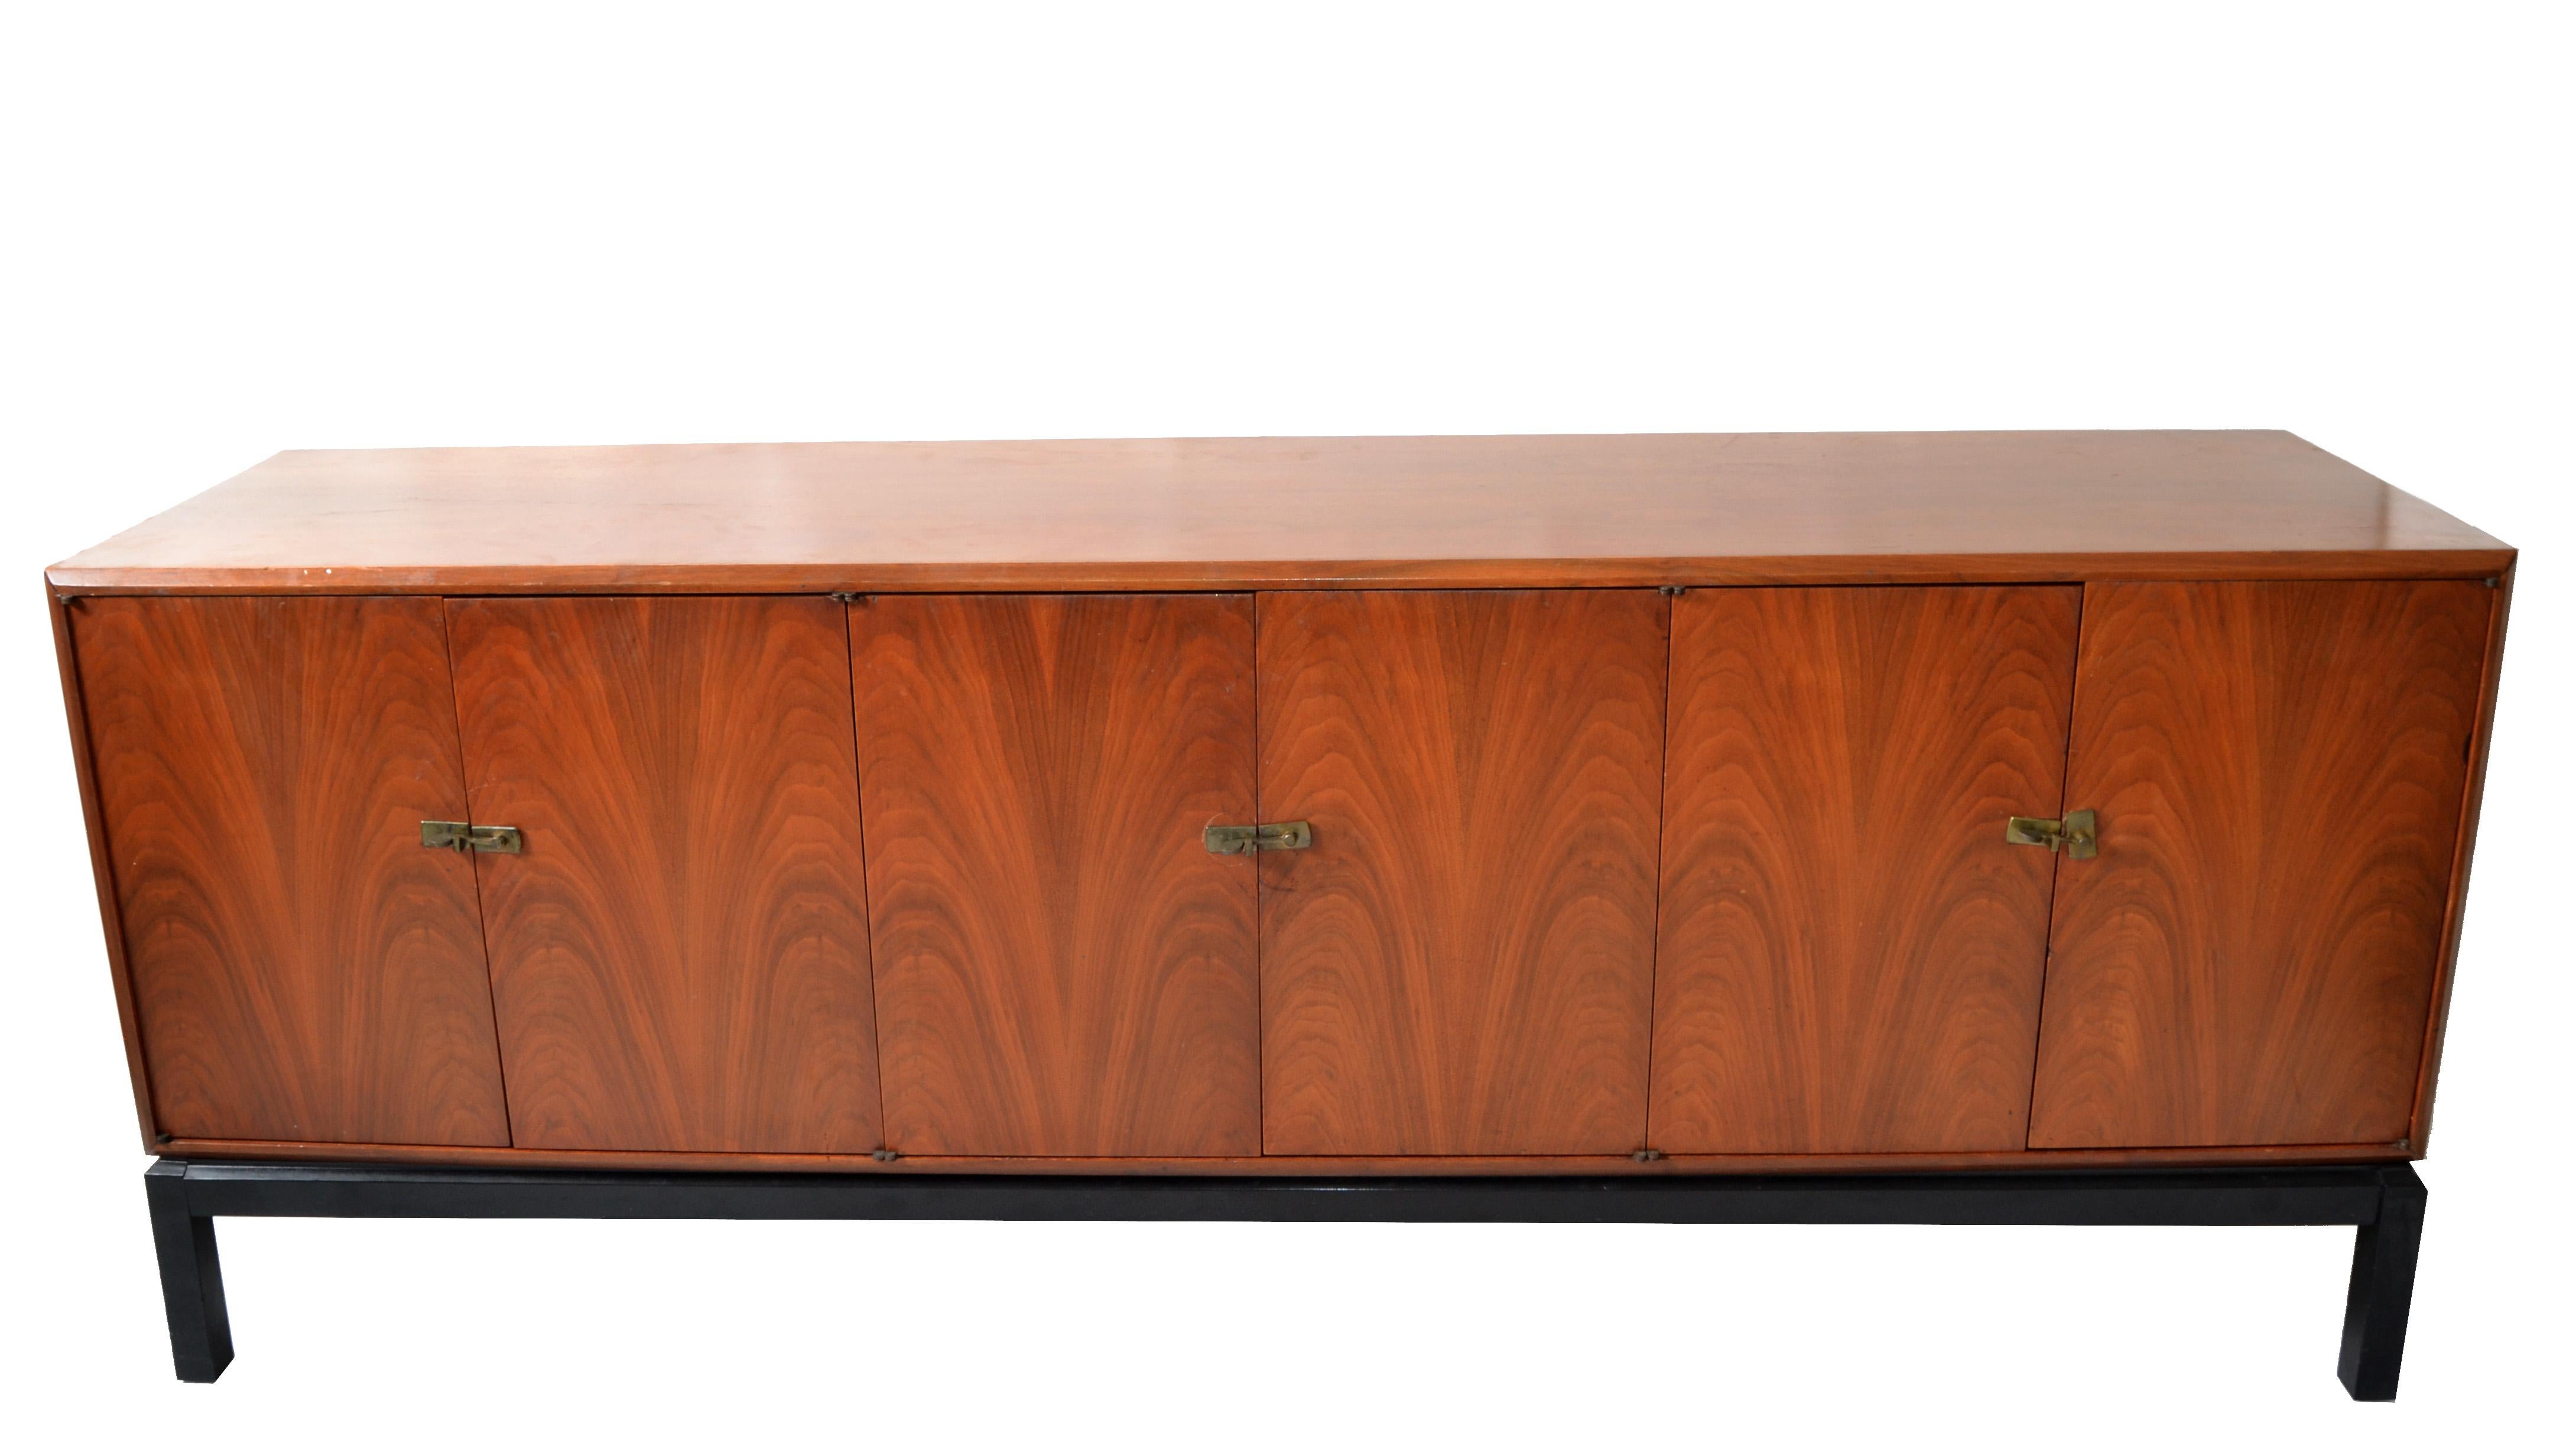 Large Mid-Century Modern American Credenza in Walnut with Brass Hardware made in the 1960.
Features one door on the left with one shelf, the middle with 3 drawers, and the right side with 2 shelves.
The Base Frame with the four legs attached is